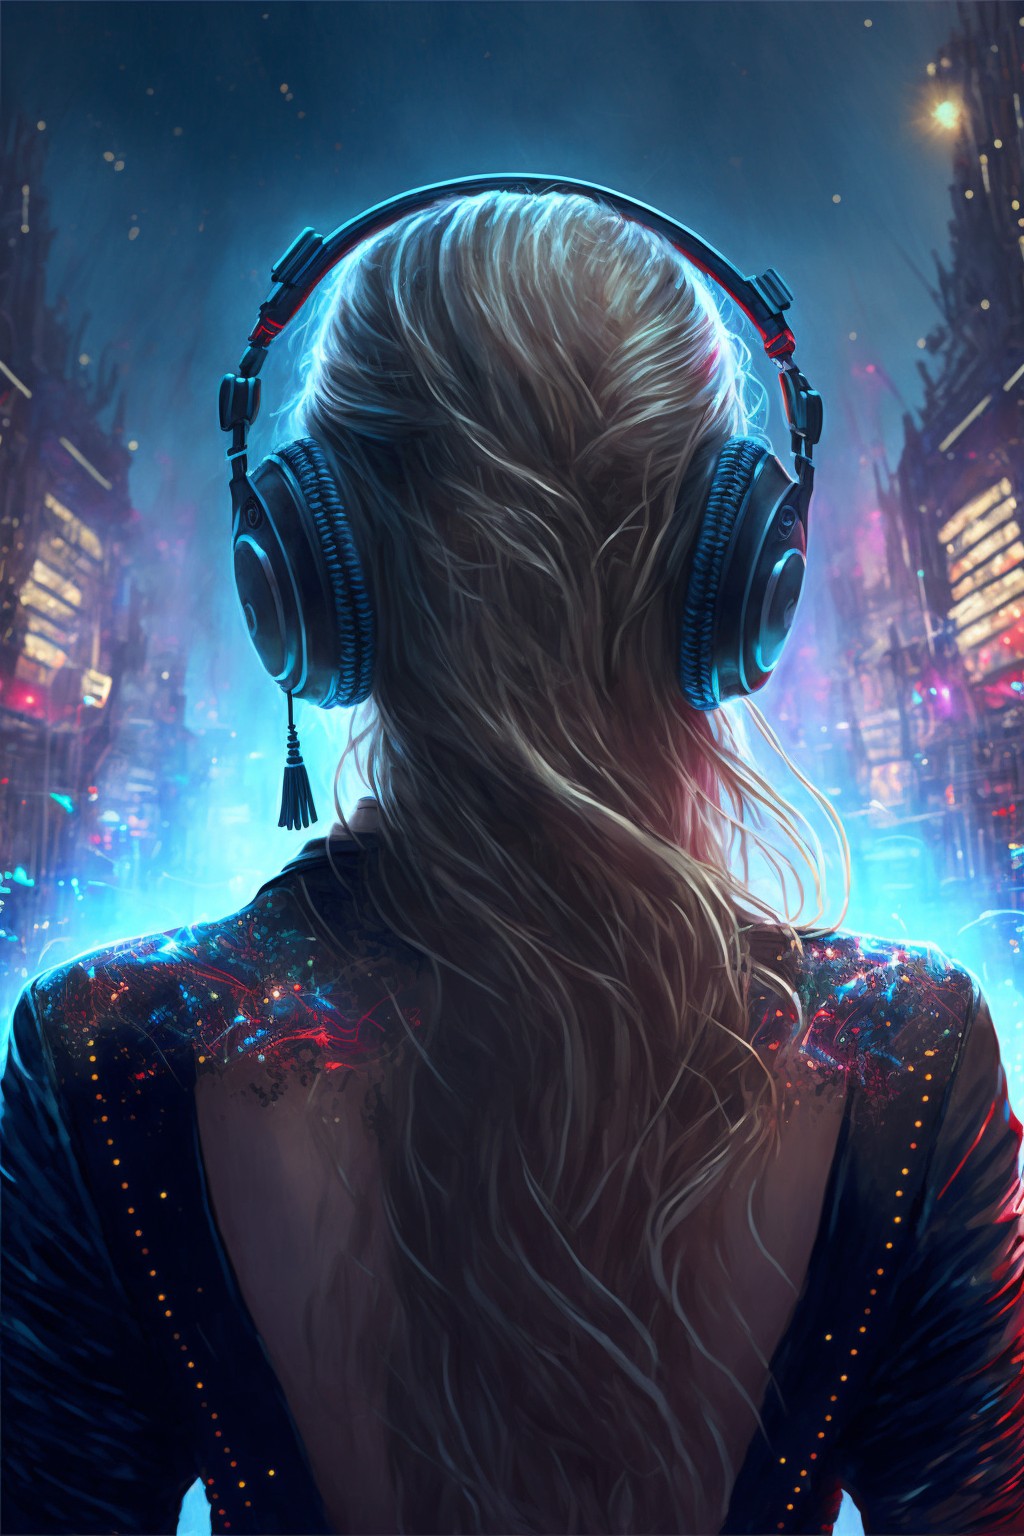 The girl wearing headphones looks at the New Year's Eve city